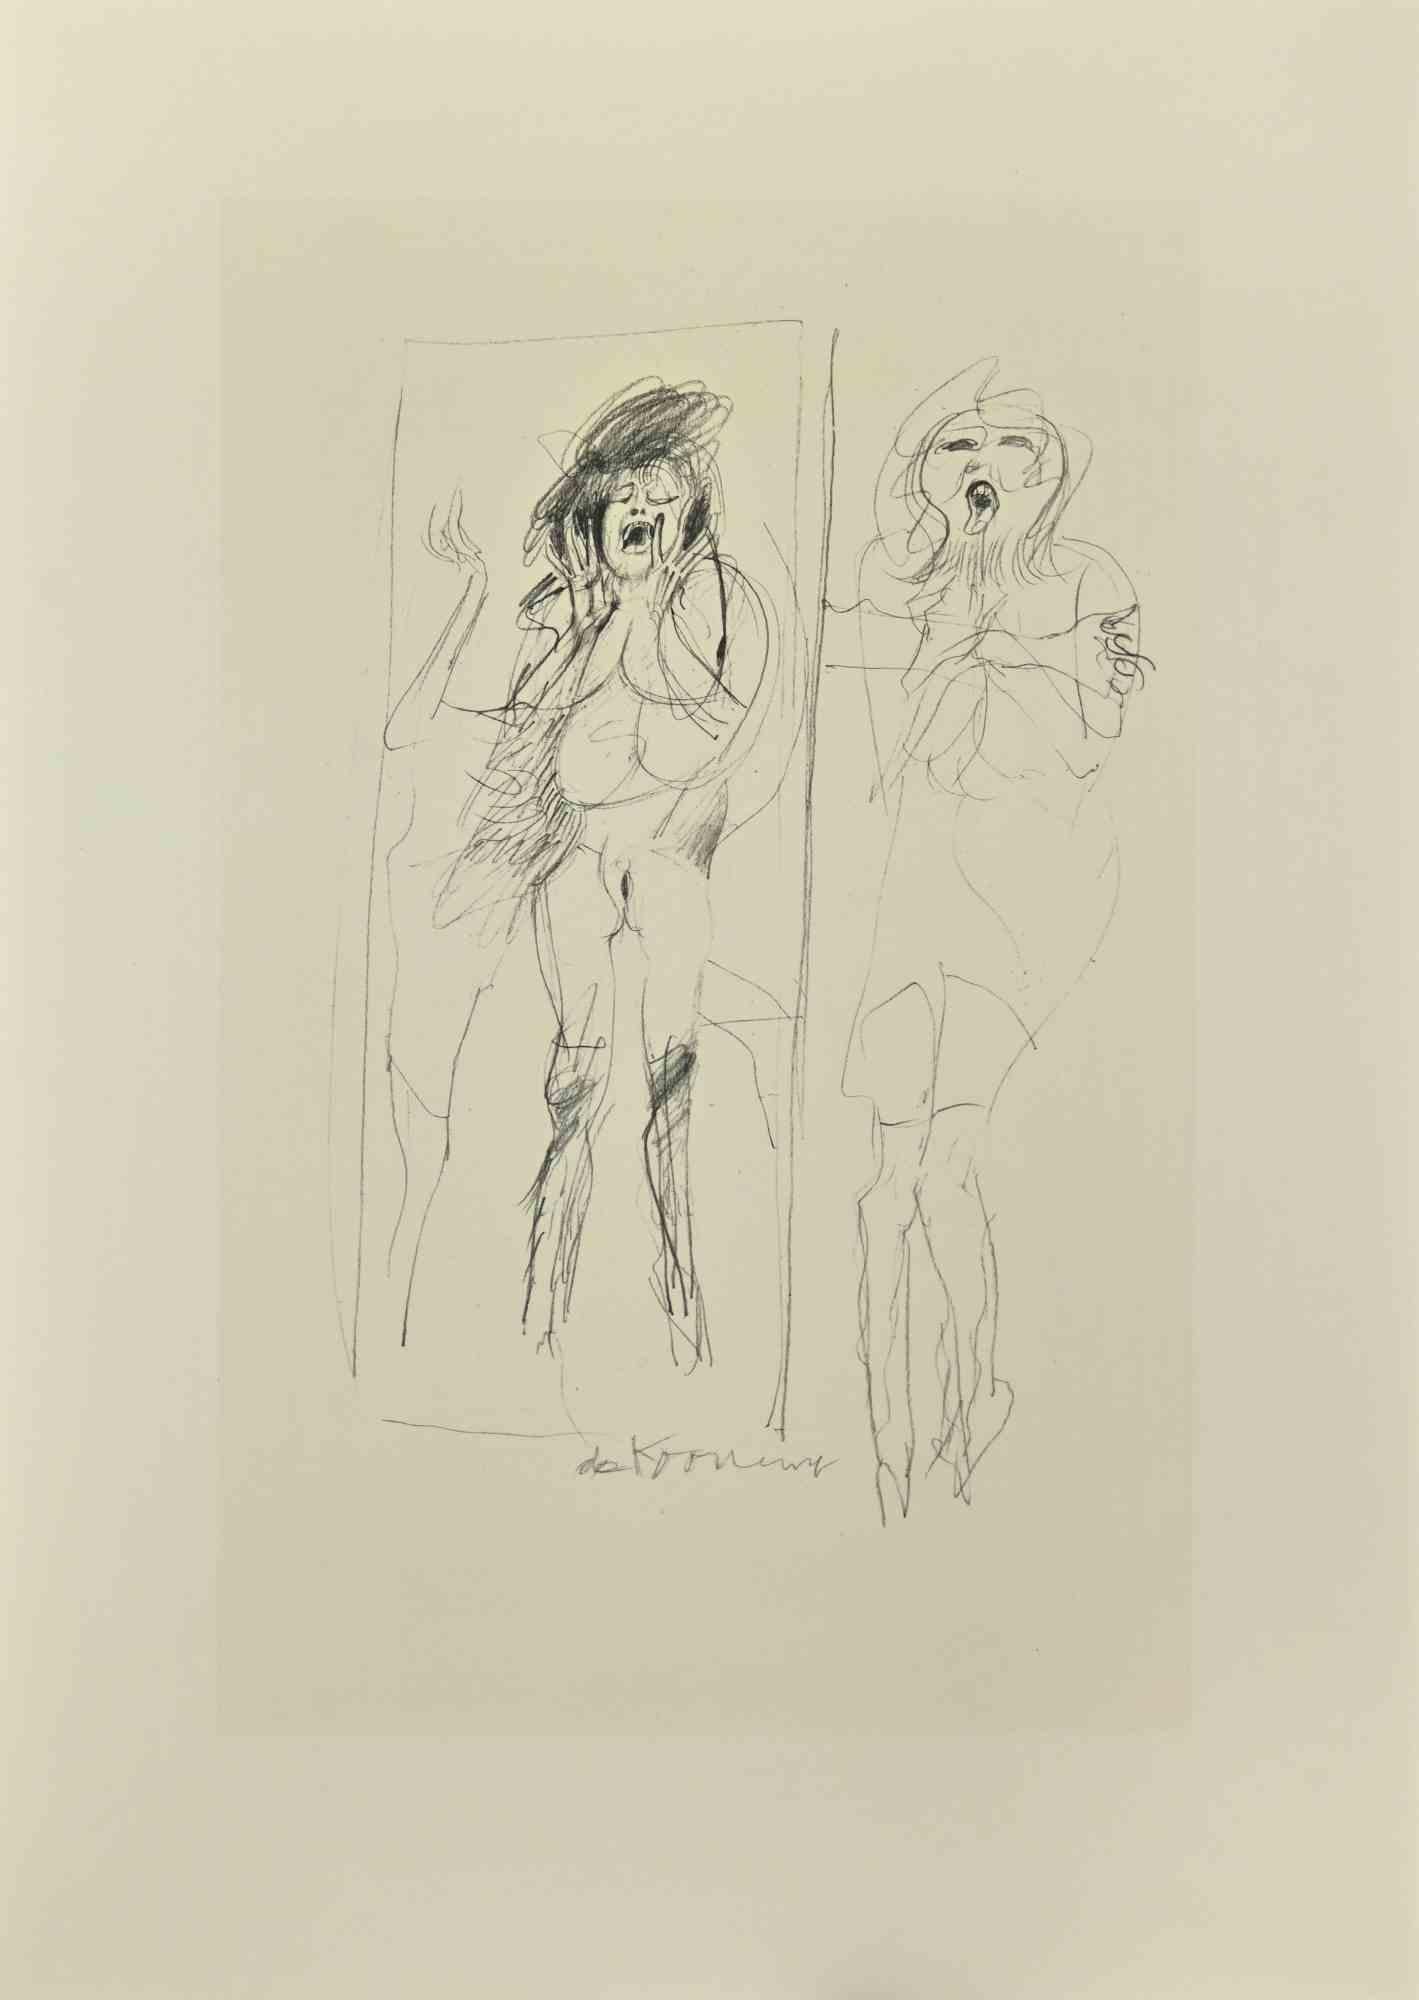 Screaming Girls - Offset and Lithograph after Willem De Kooning - 1985